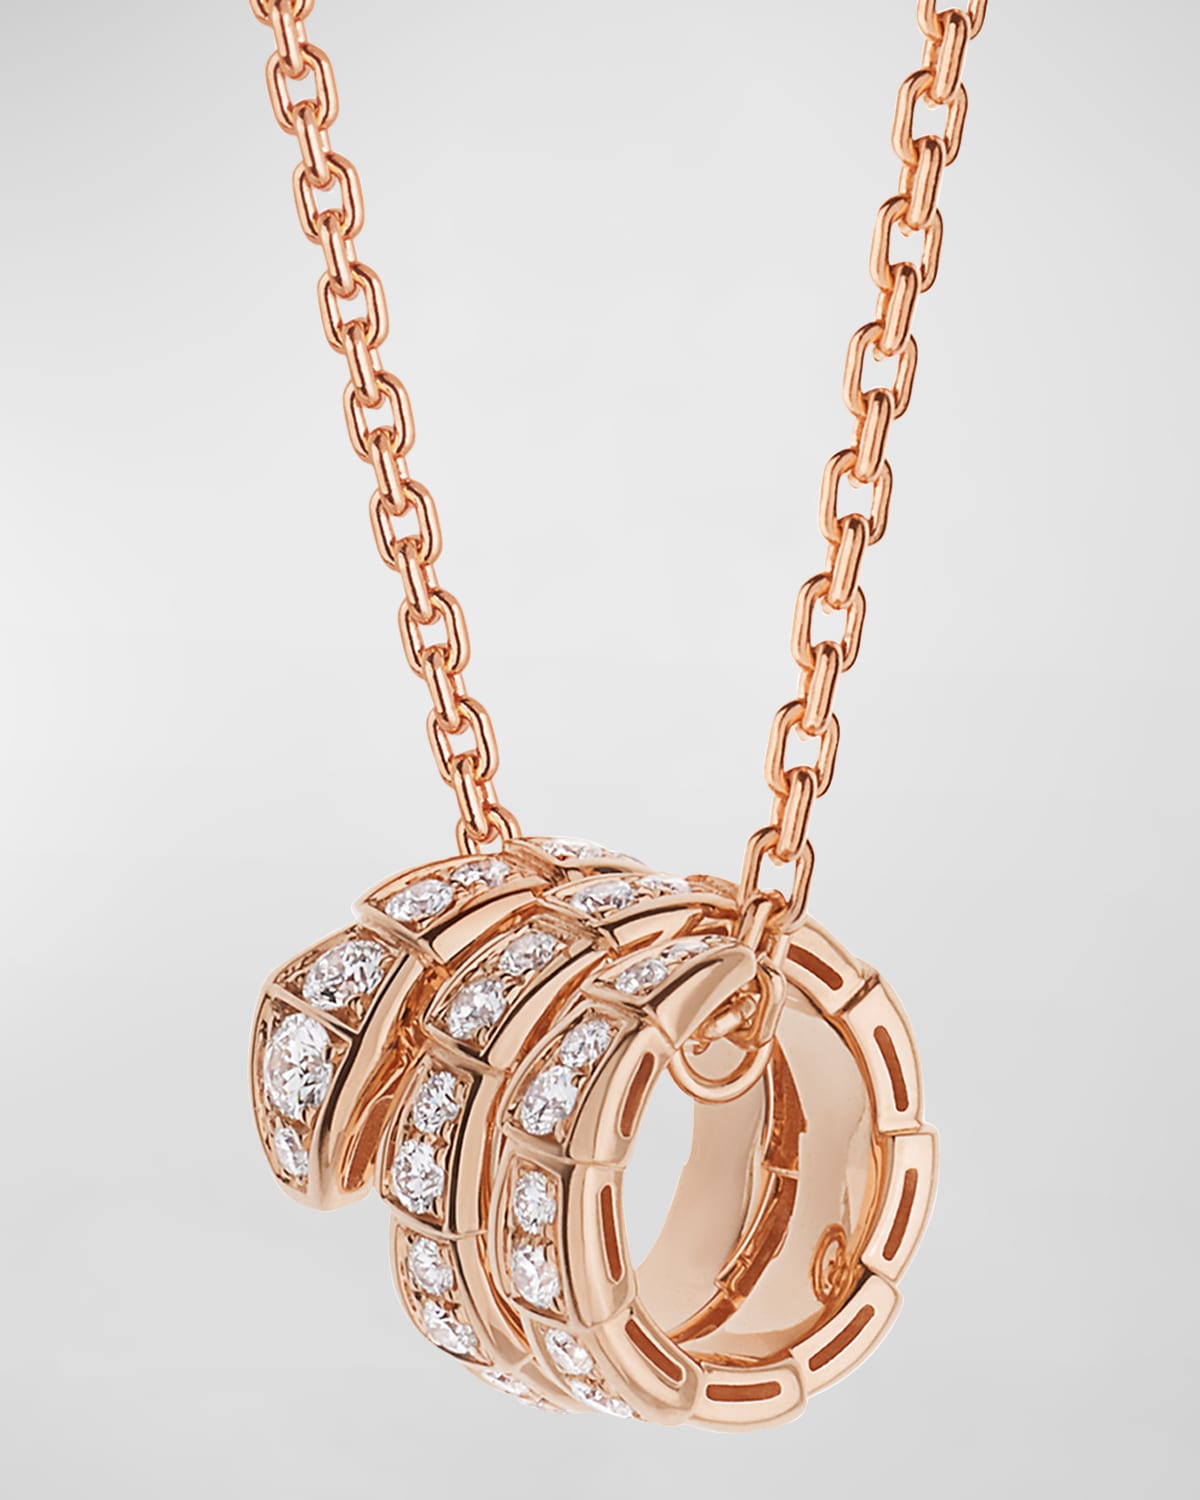 Bvlgari Serpenti Viper Necklace In 18k Rose Gold With Full Diamond Pave